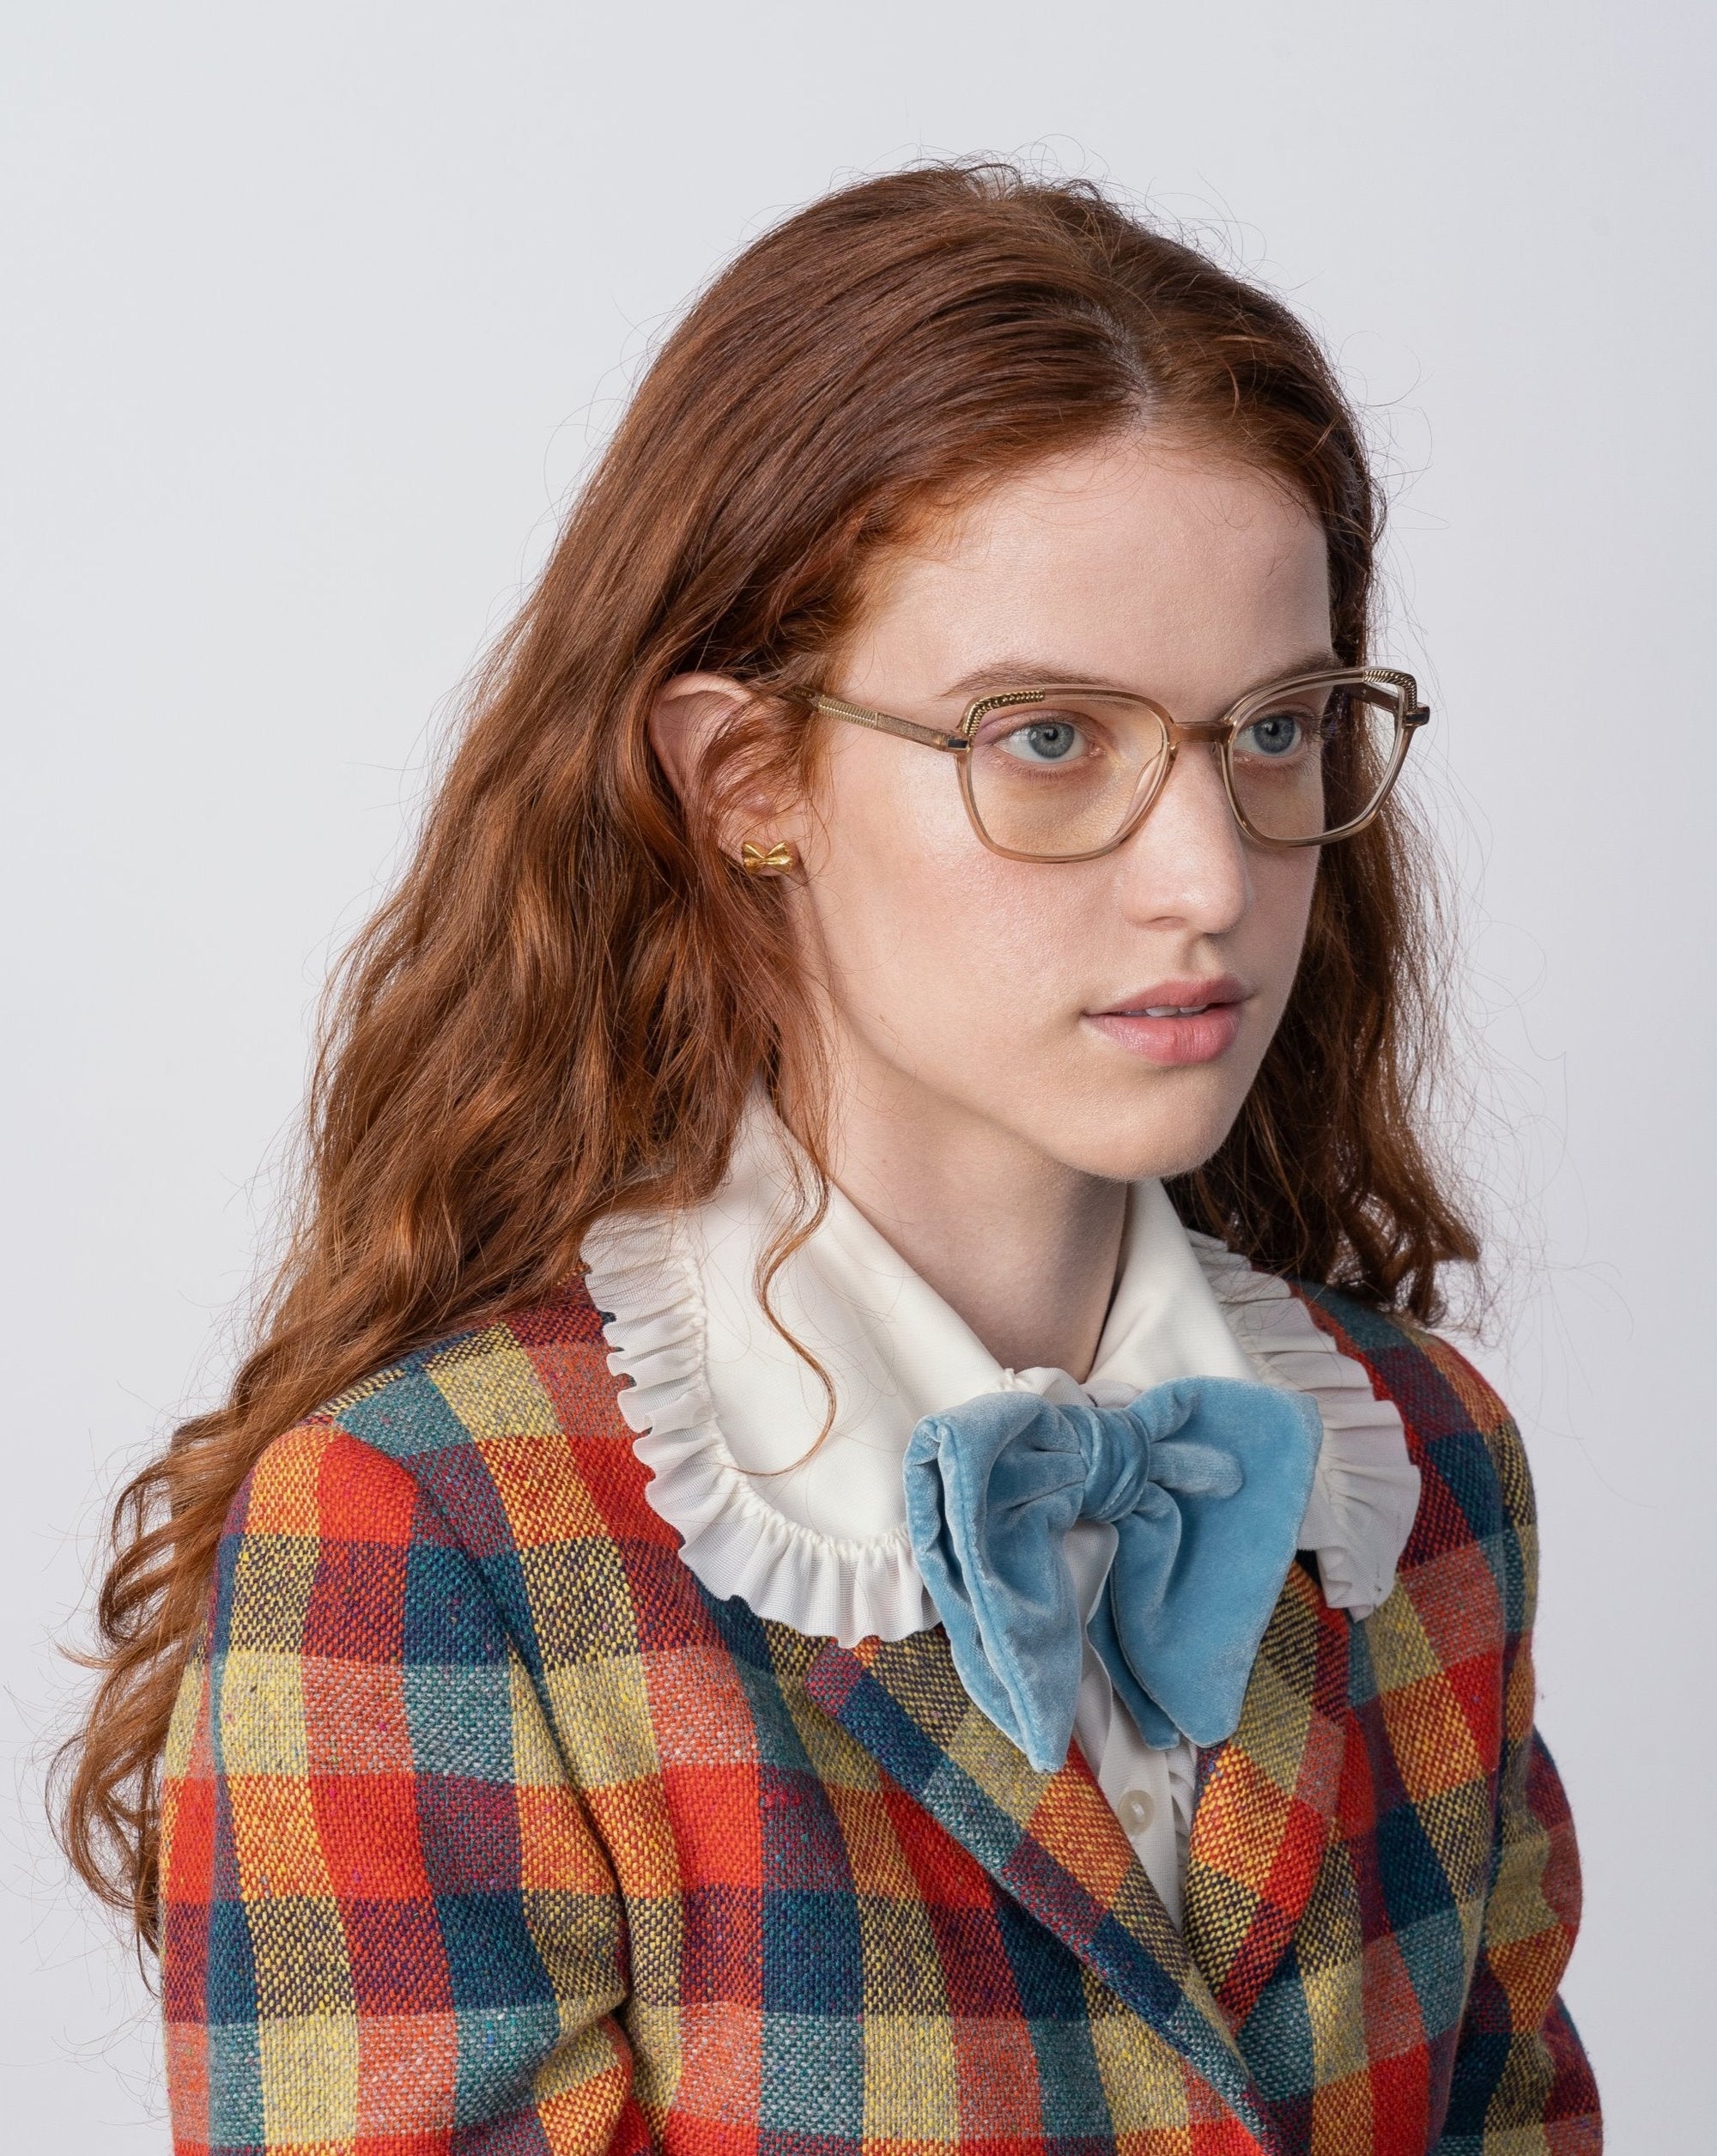 A person with long, wavy auburn hair, wearing Mimosa by For Art&#39;s Sake® glasses with blue light filters, a white blouse with a ruffled collar, and a blue velvet bow tie is dressed in a multicolored plaid blazer. They are looking off to the side against a plain background.